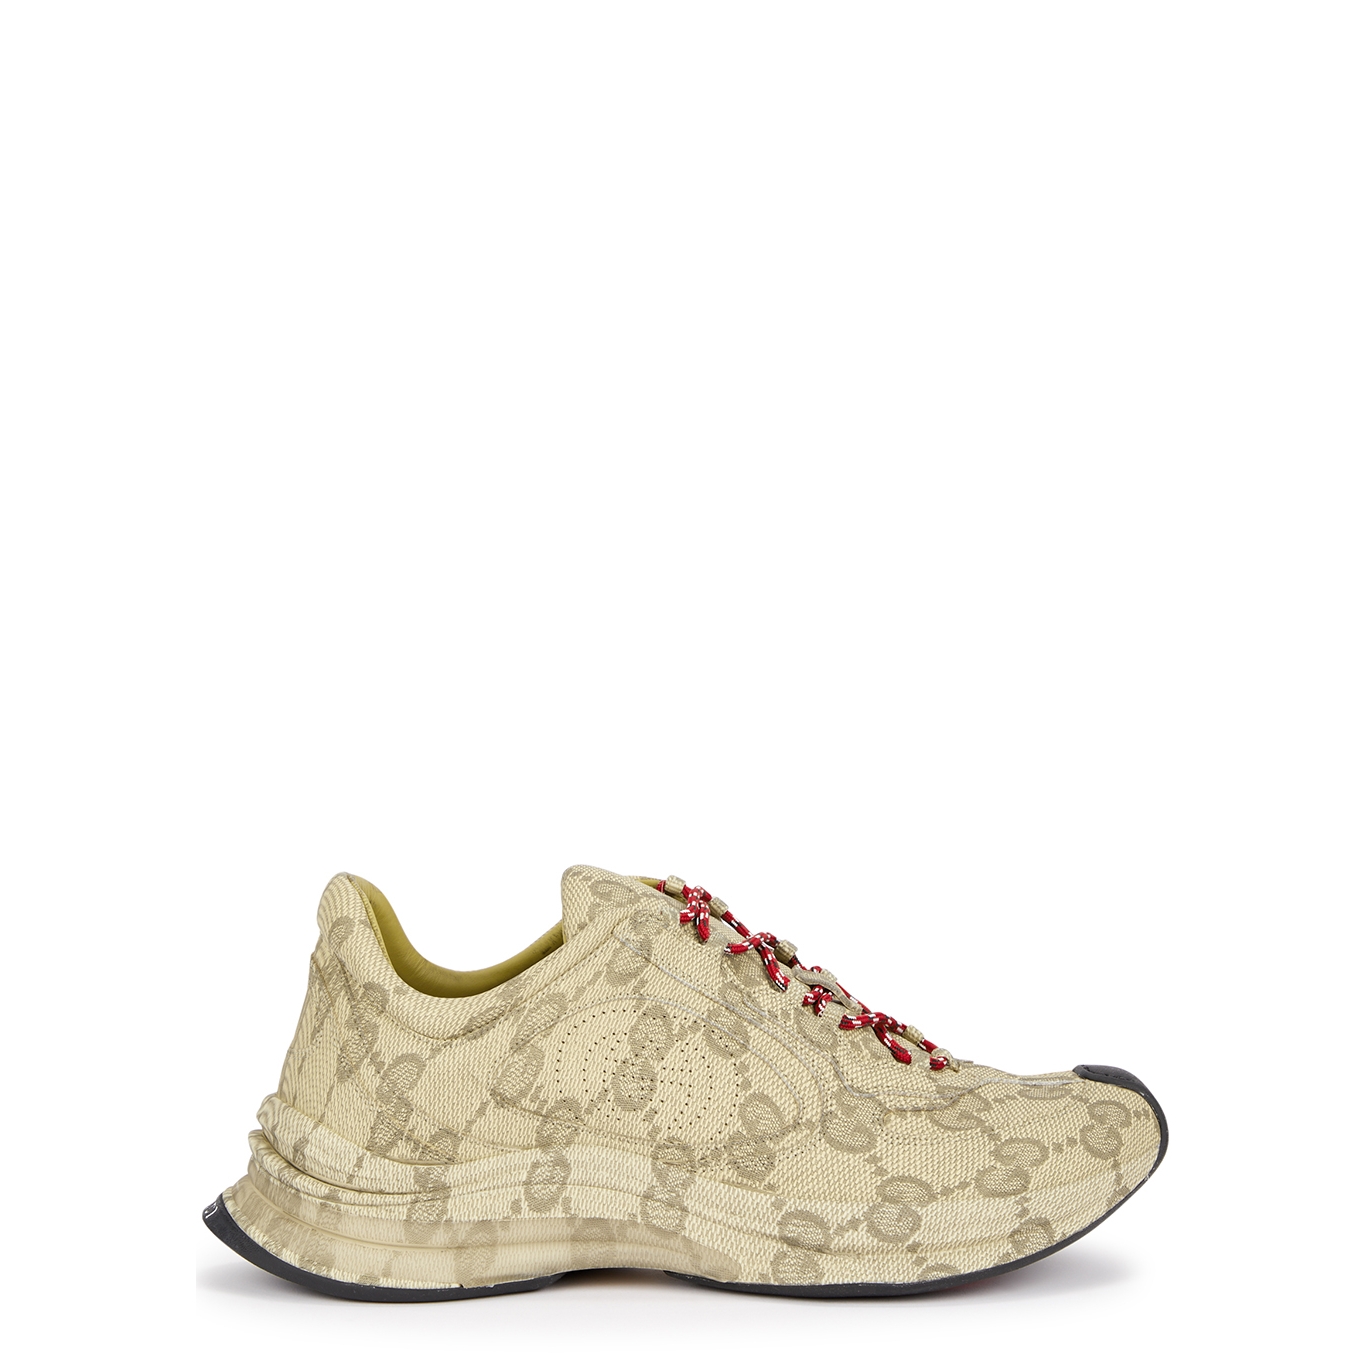 Gucci Run GG-monogrammed Leather Sneakers - Beige - 11